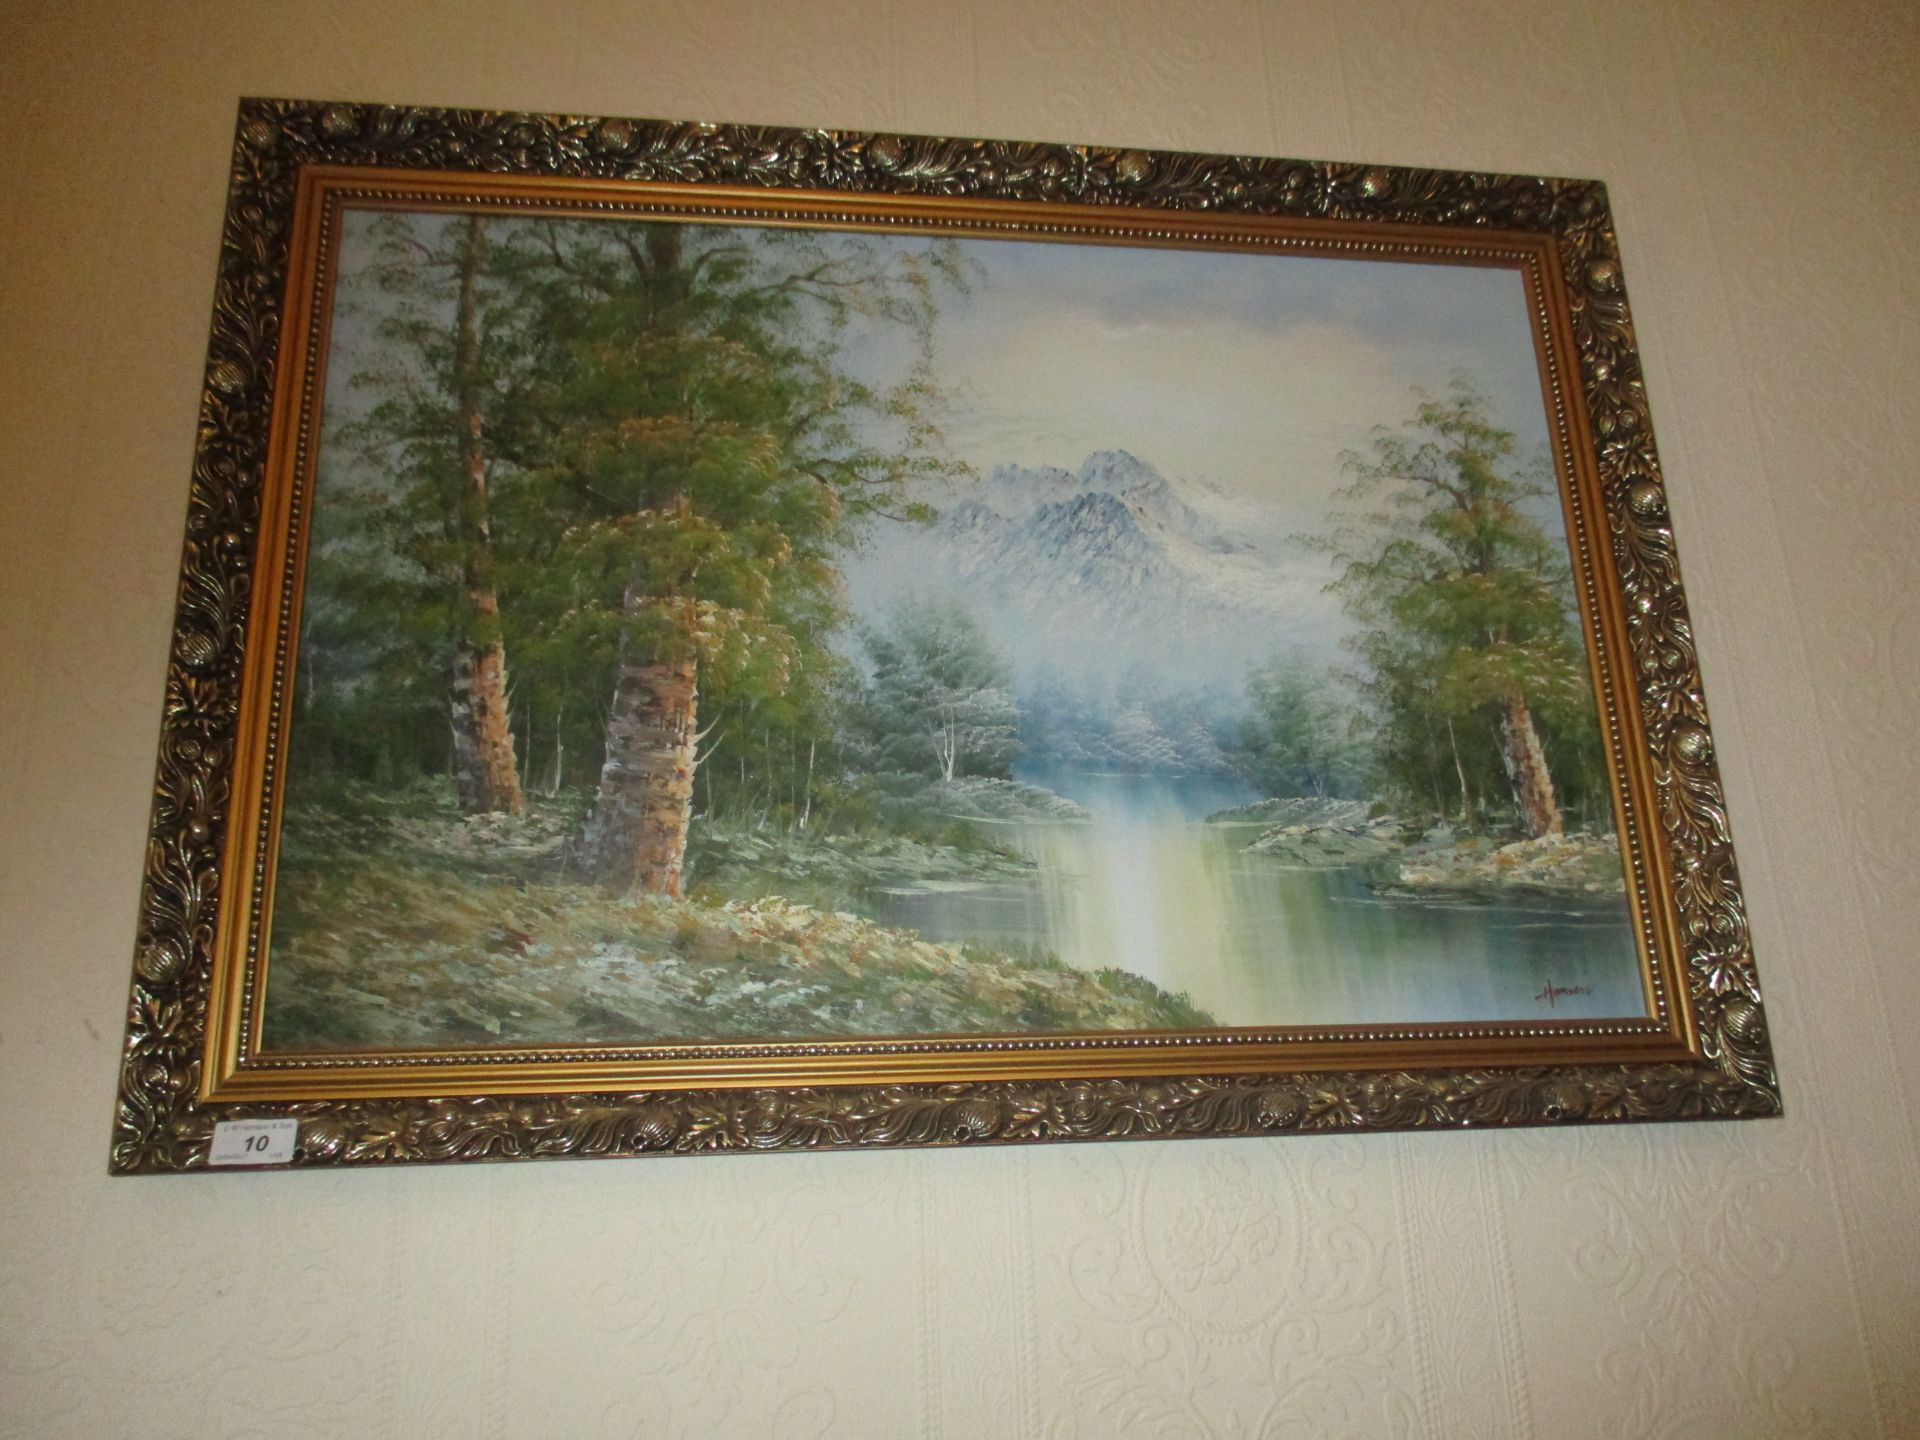 'Hanson' ornate gilt framed oil painting "River with mountains backdrop" 62 x 86cm and another